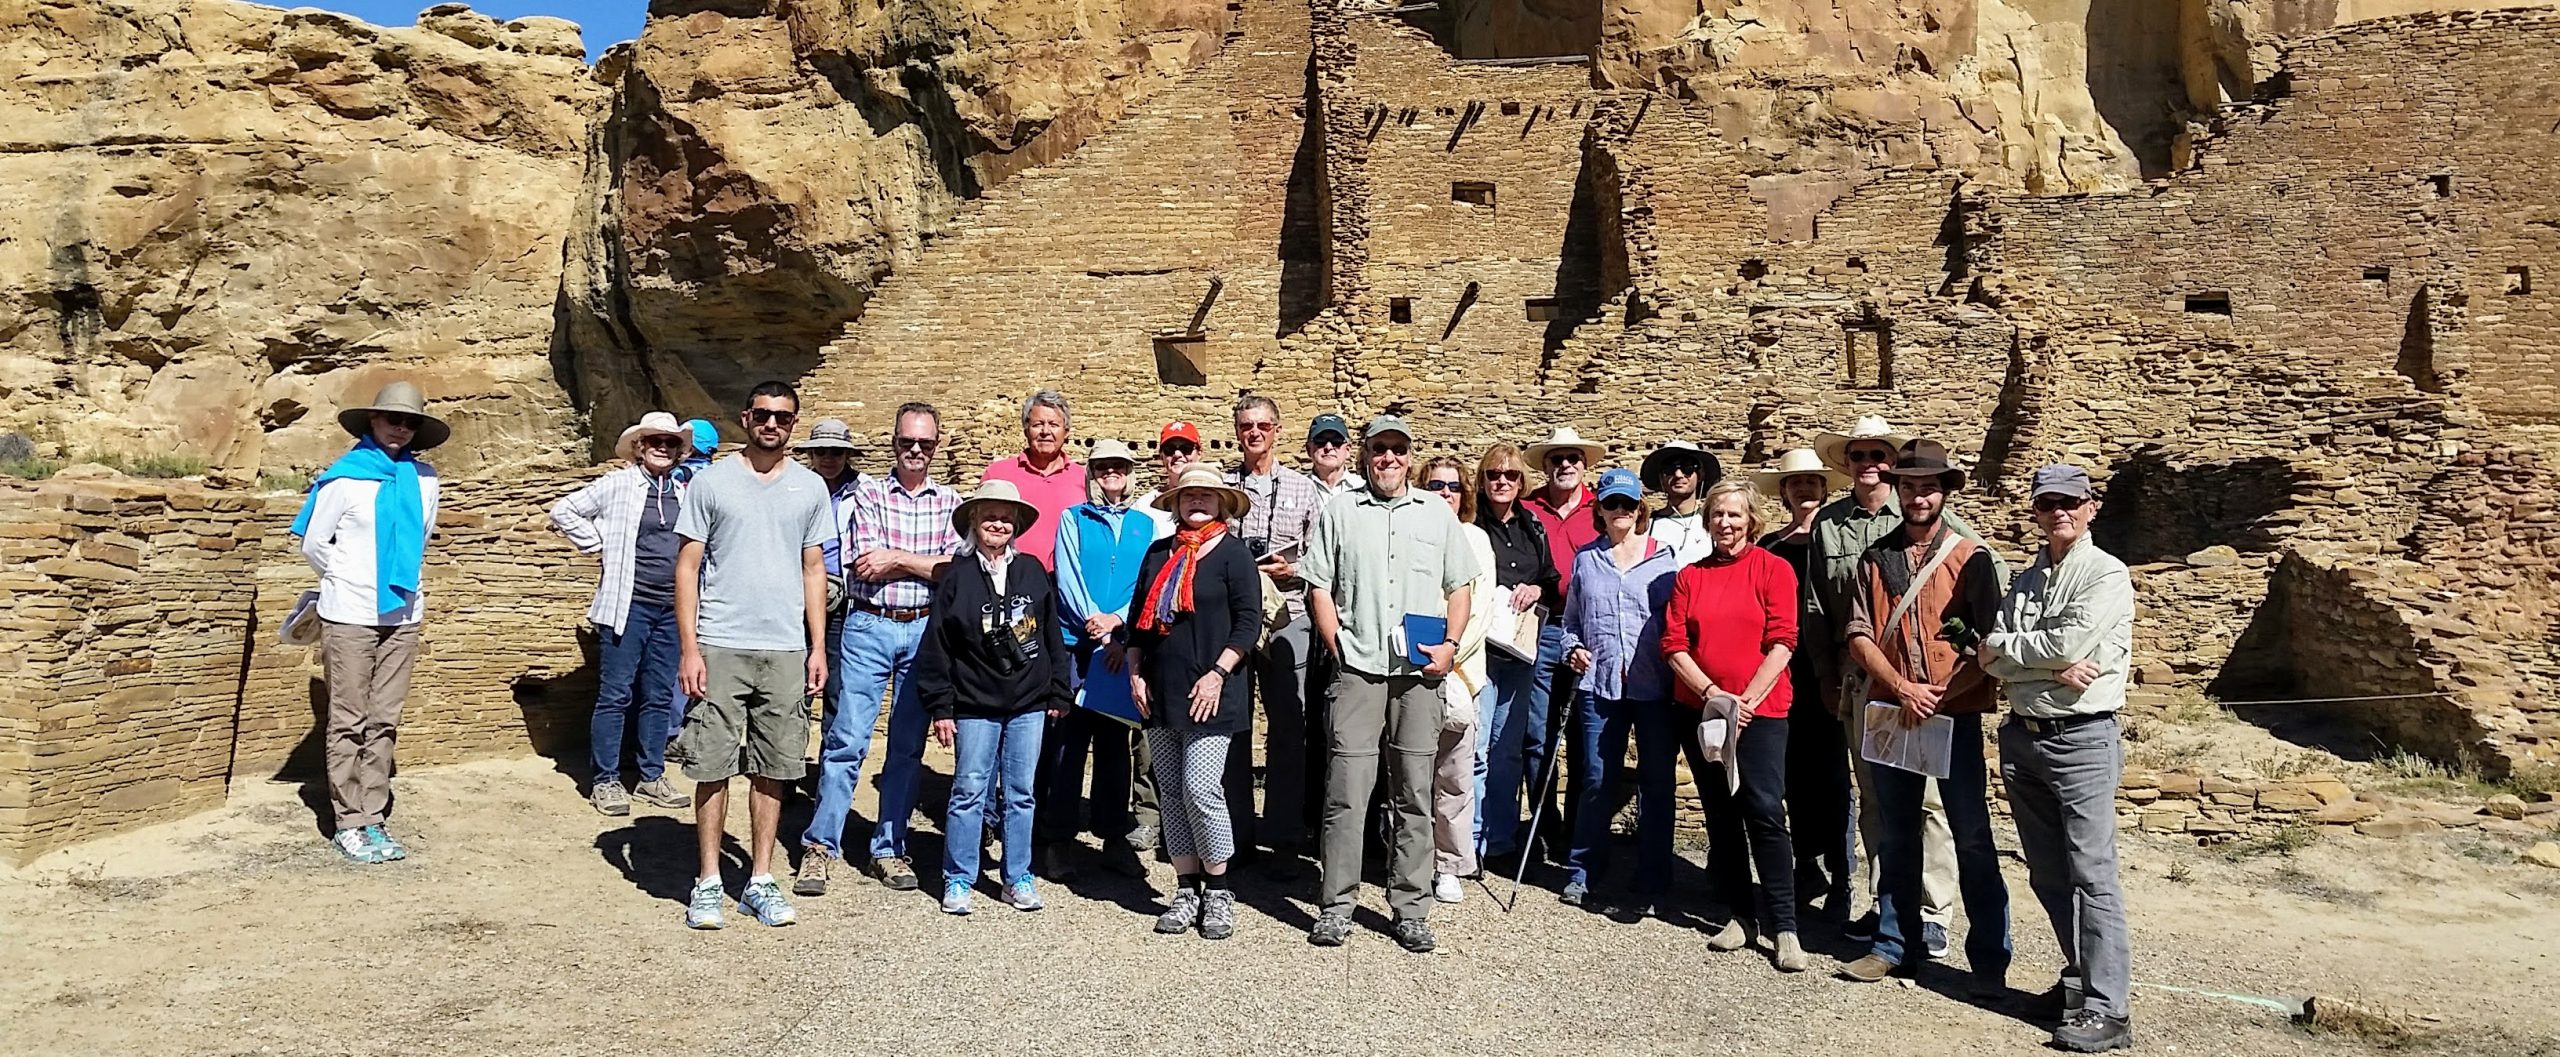 Member trip to Chaco Canyon, October 2016.